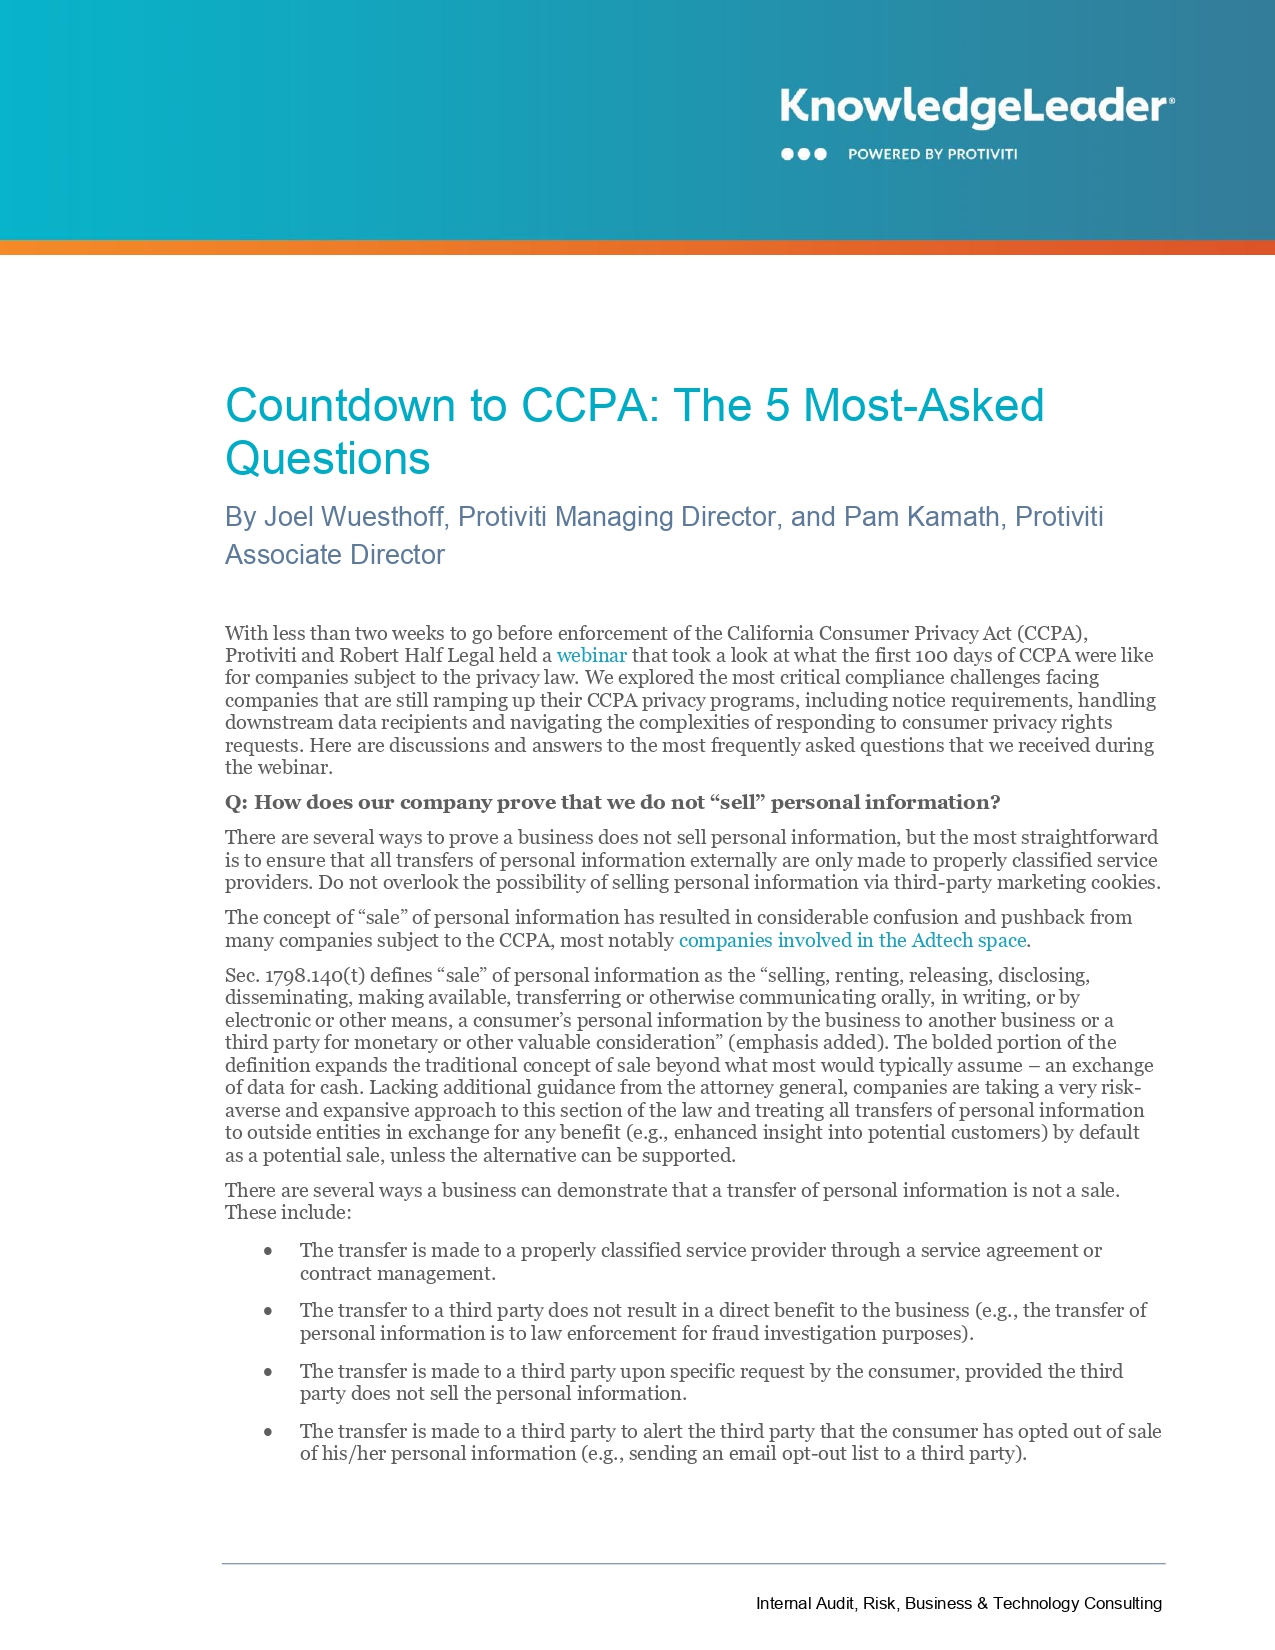 Countdown to CCPA: The 5 Most-Asked Questions